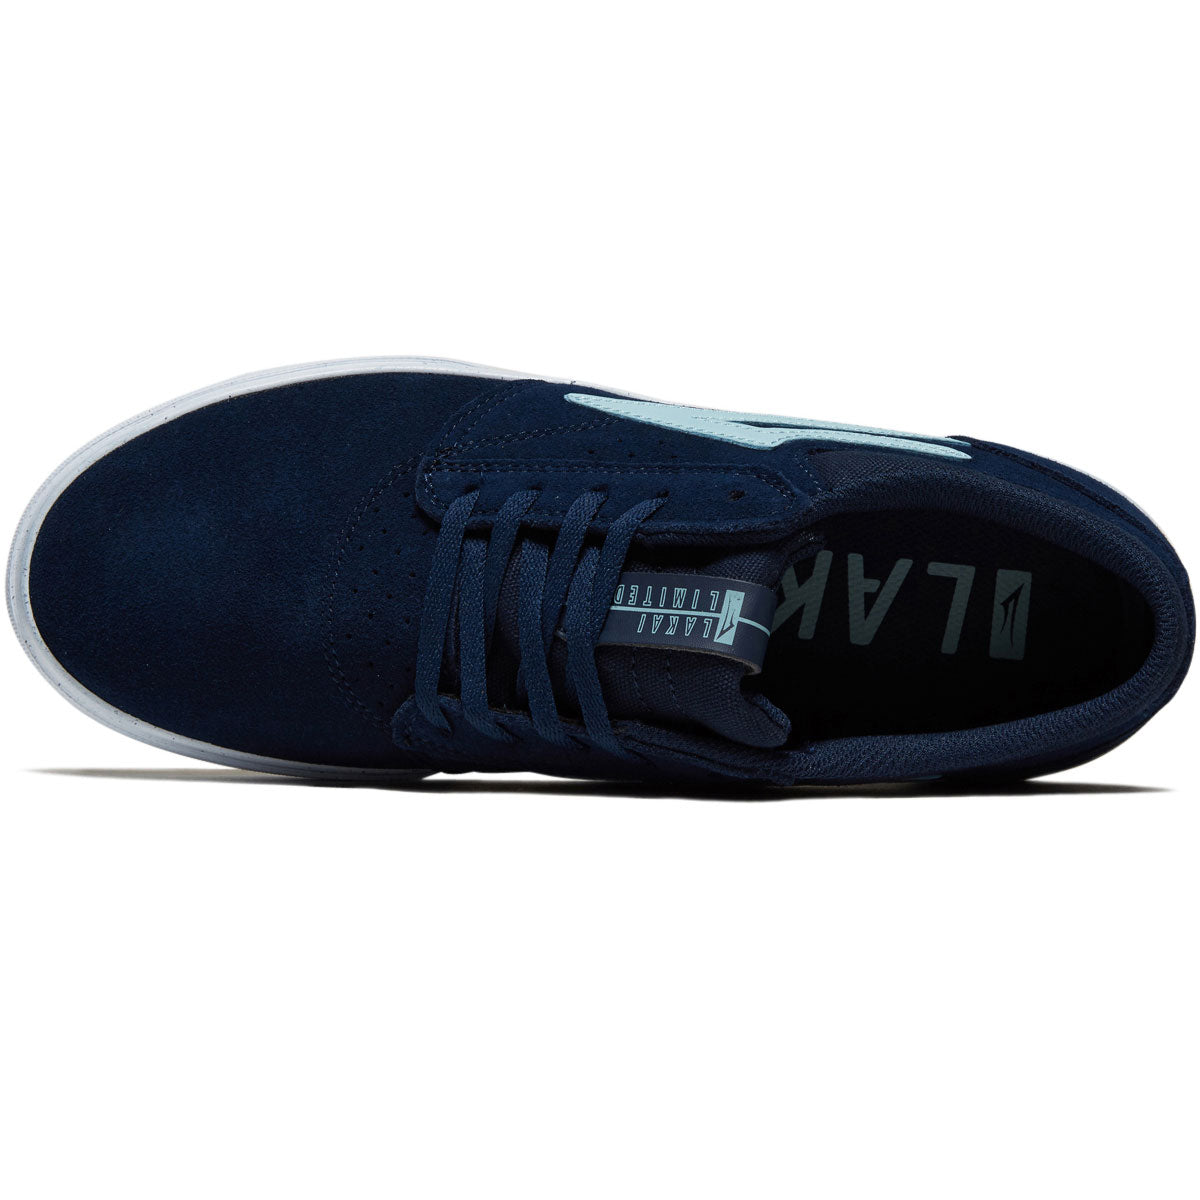 Lakai Griffin Shoes - Suede Navy image 3